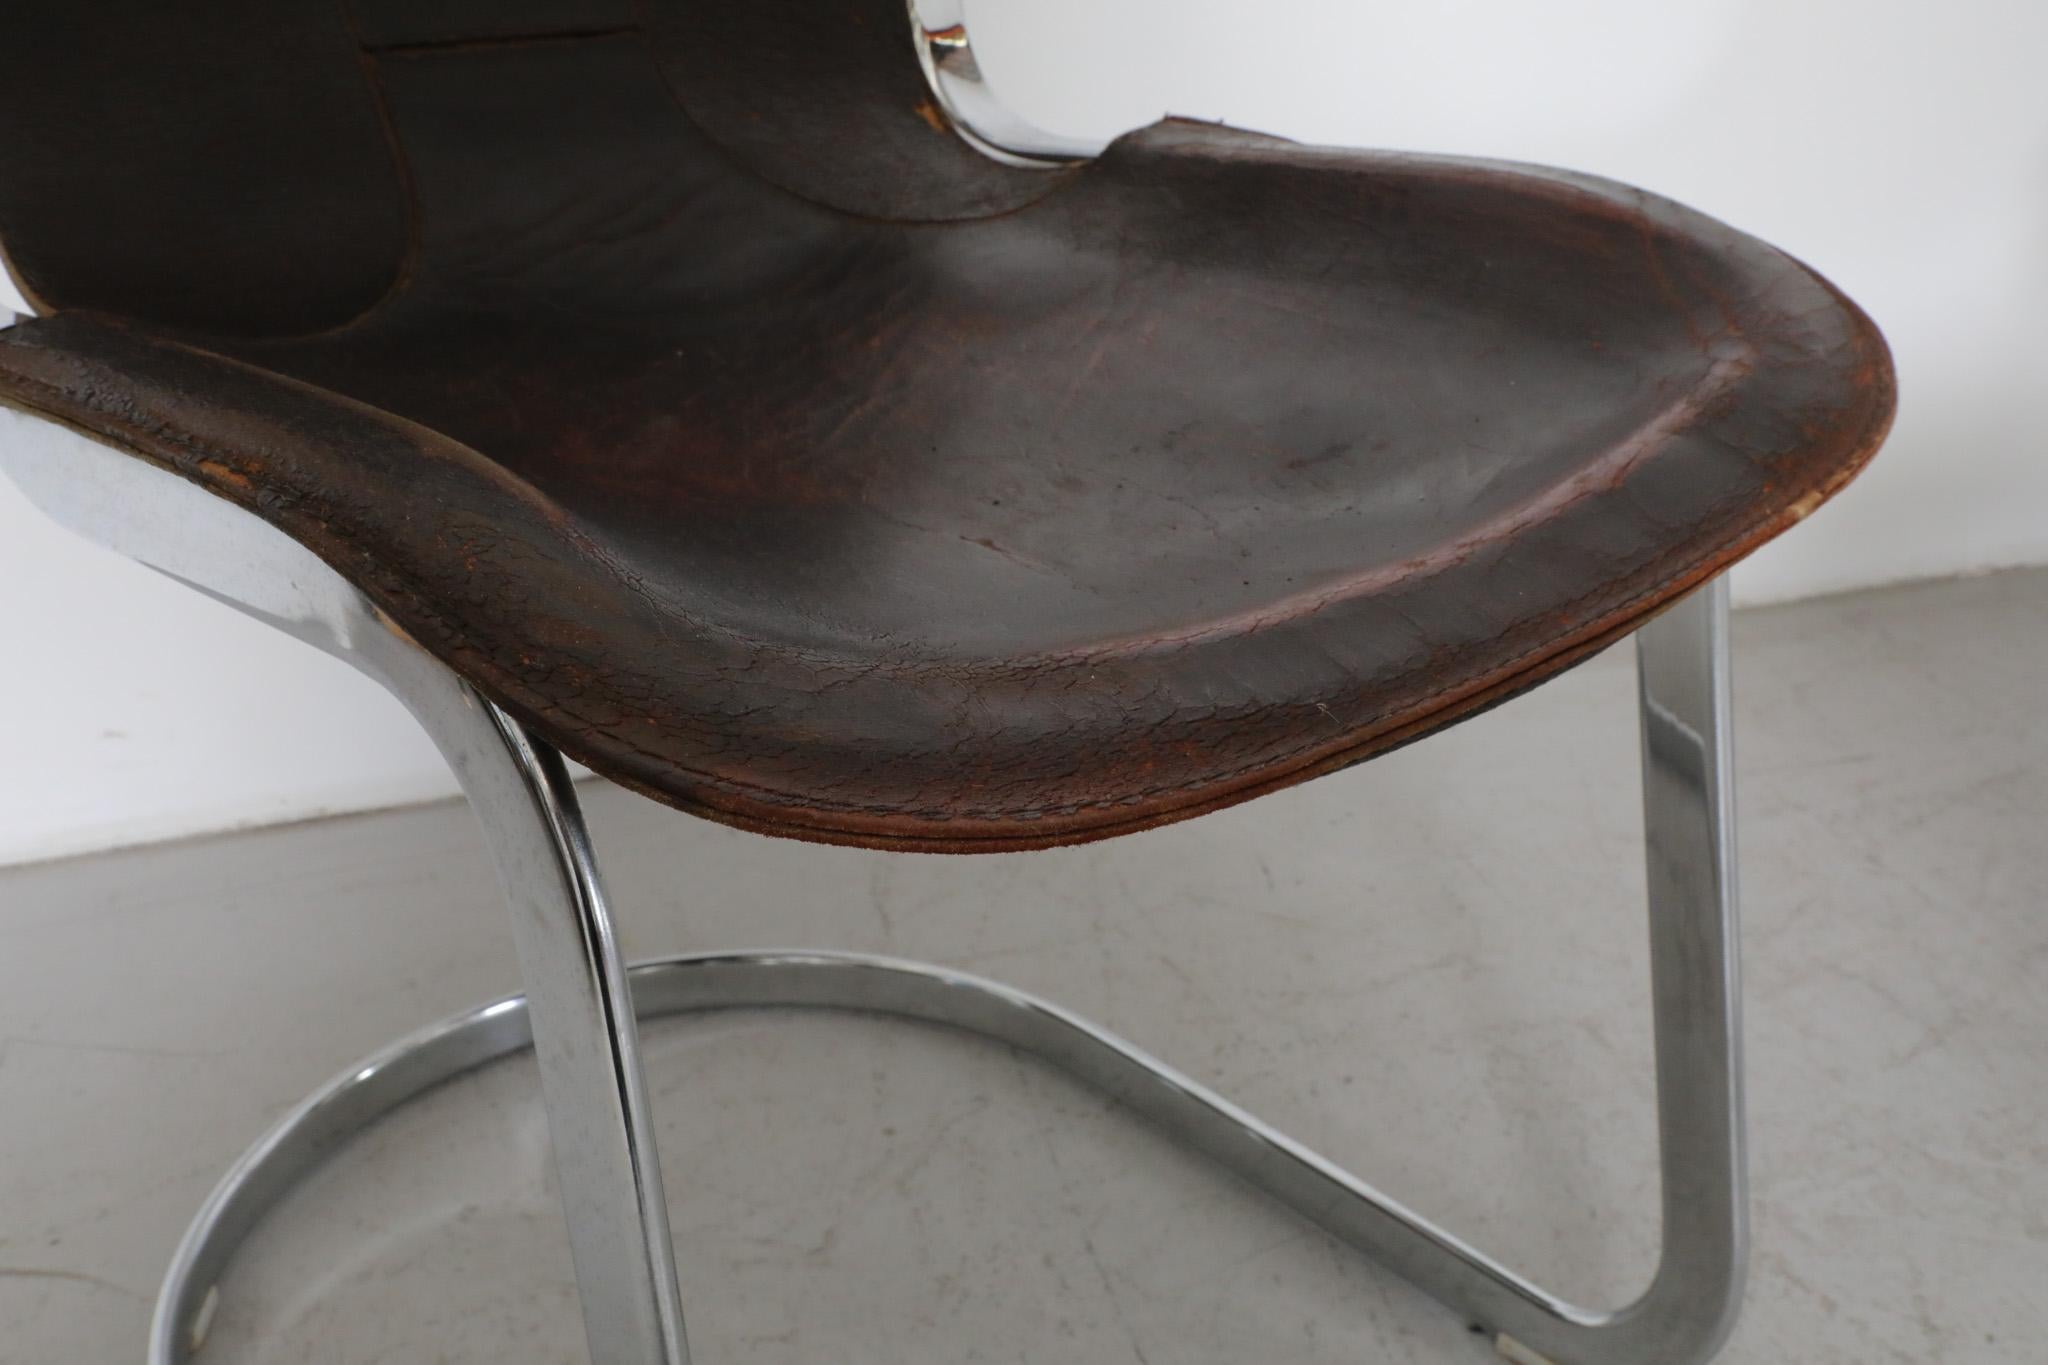 Set of 6 Willy Rizzo Chrome and Brown Leather Cantilever Chairs for Cidue, 1960s For Sale 8